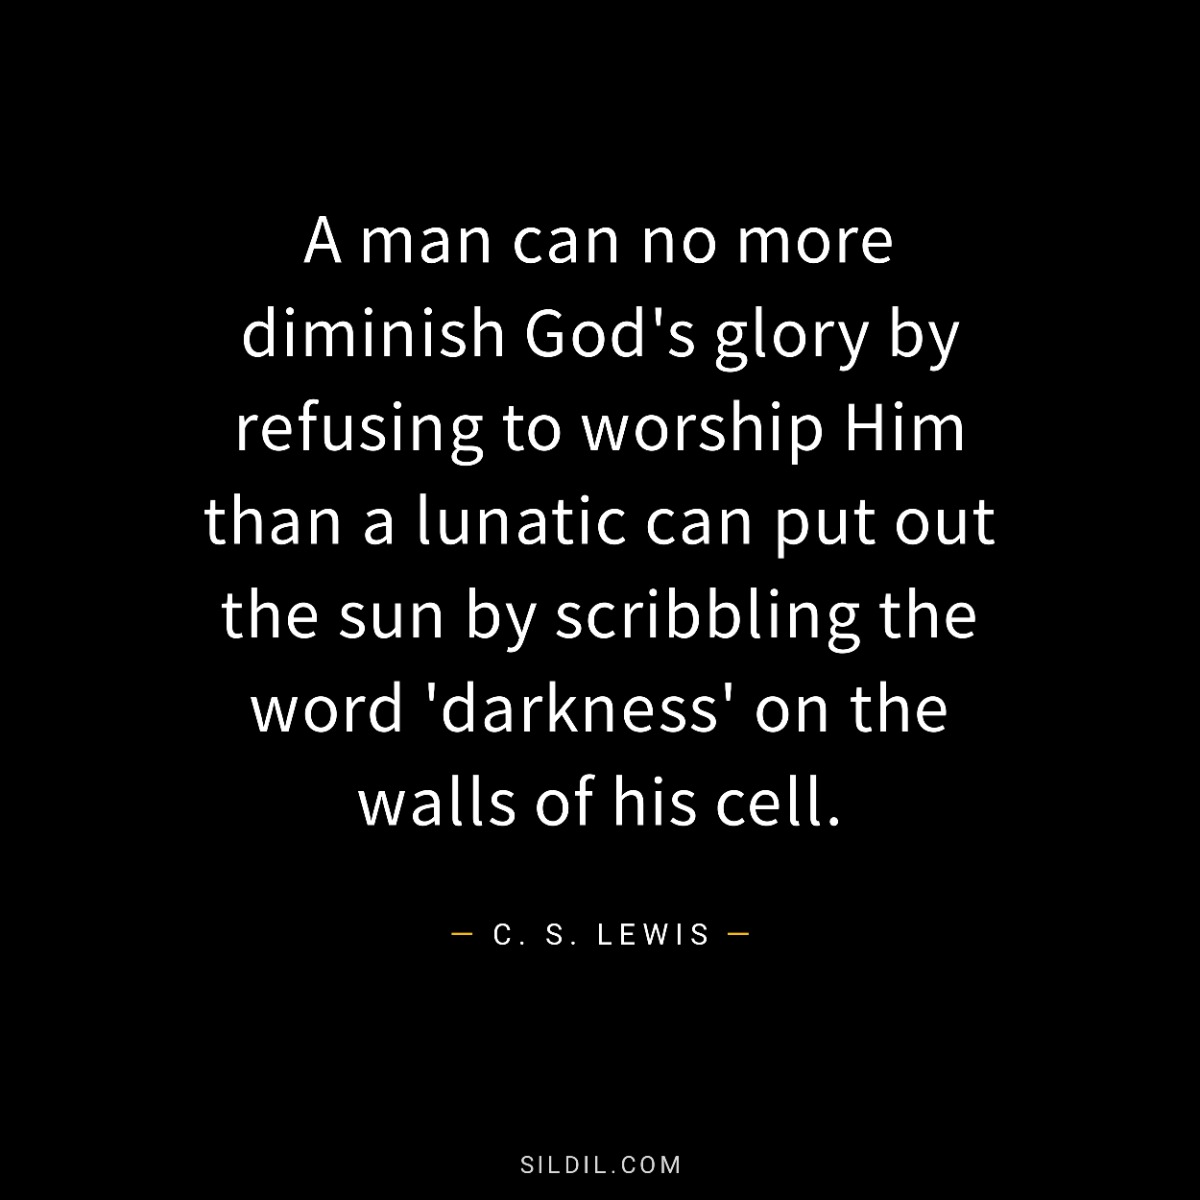 A man can no more diminish God's glory by refusing to worship Him than a lunatic can put out the sun by scribbling the word 'darkness' on the walls of his cell.